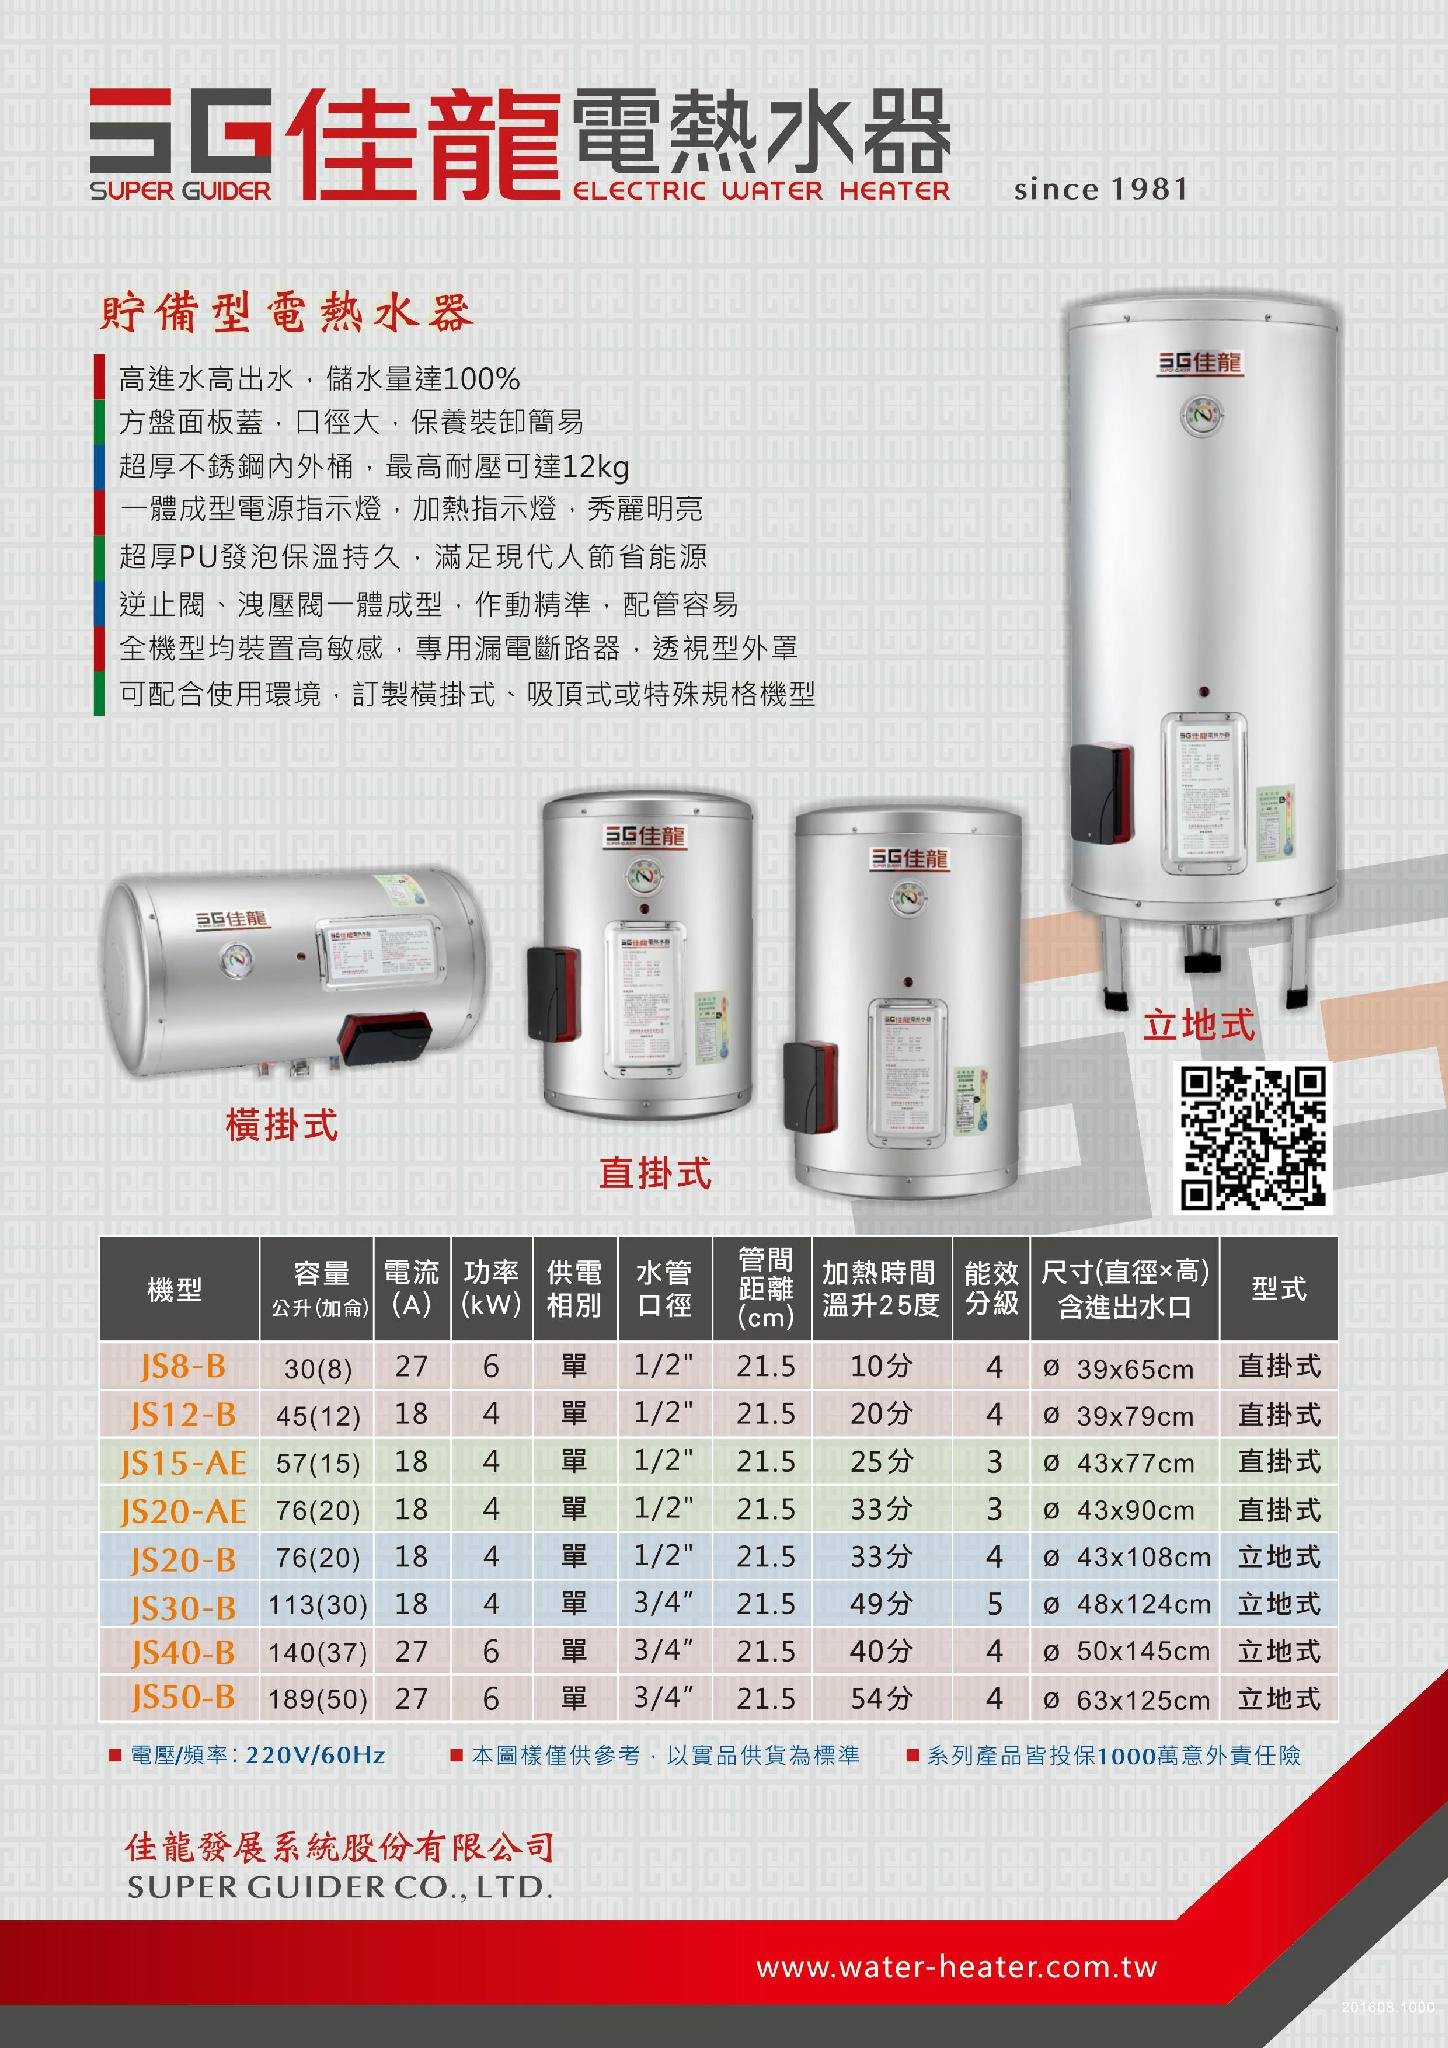 Super Guider Electric Water Heater Vertical-Wall Series JS20-AE 3